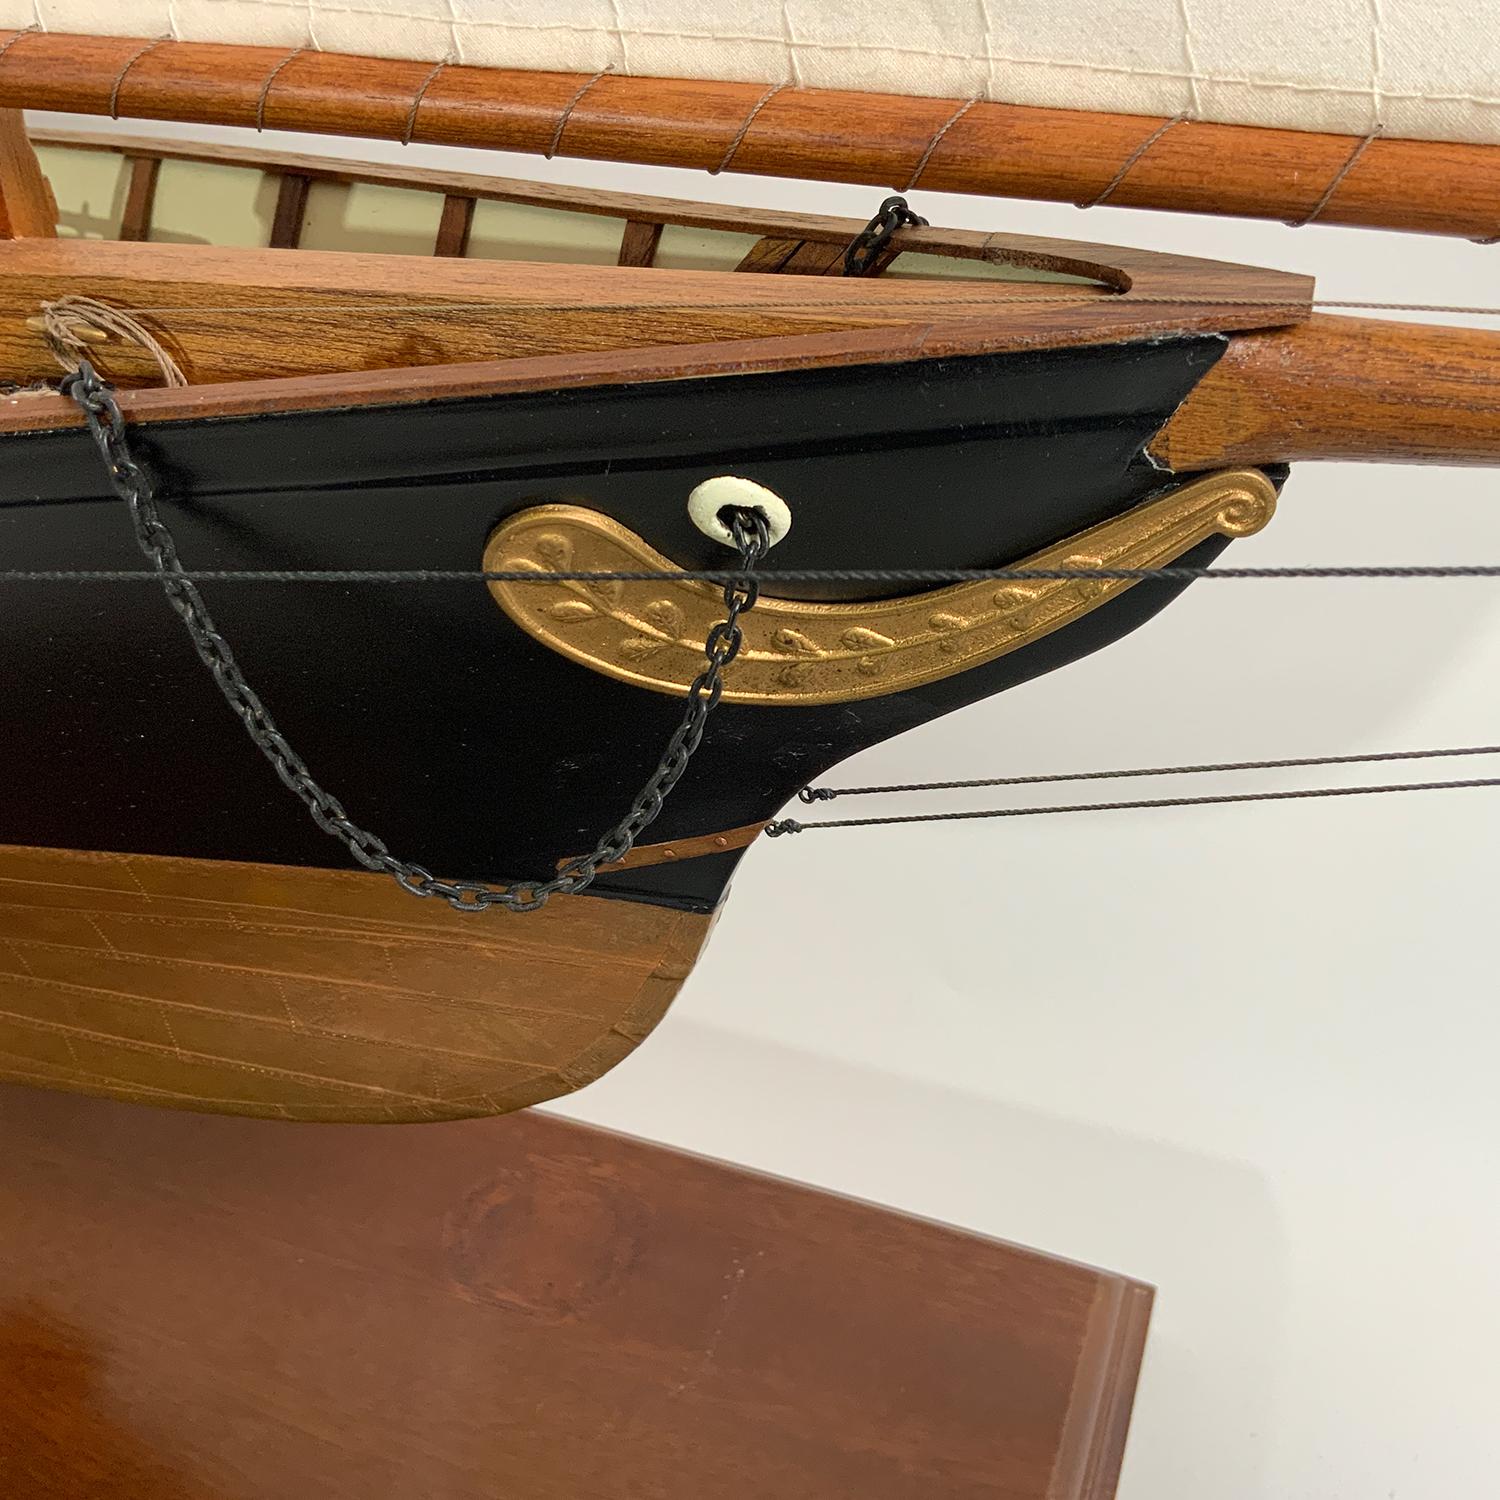 Hand-Crafted Museum Quality Model of Schooner Yacht America